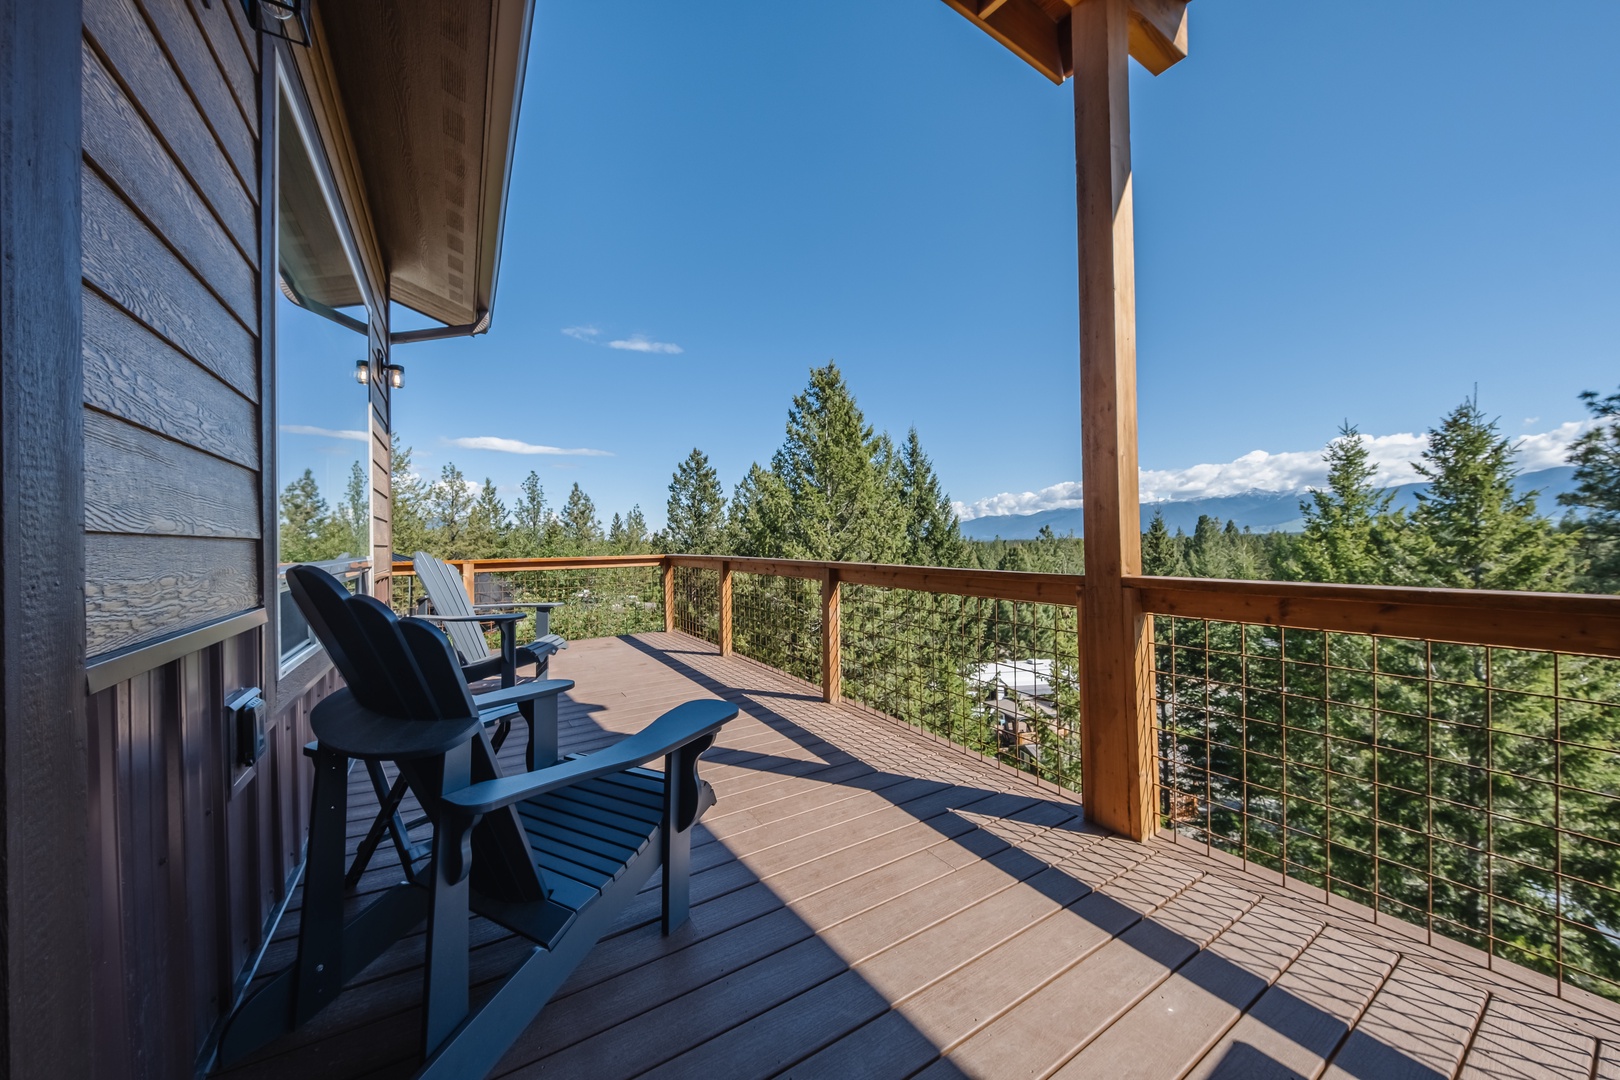 Take a moment to unwind and breathe in the fresh air on the deck